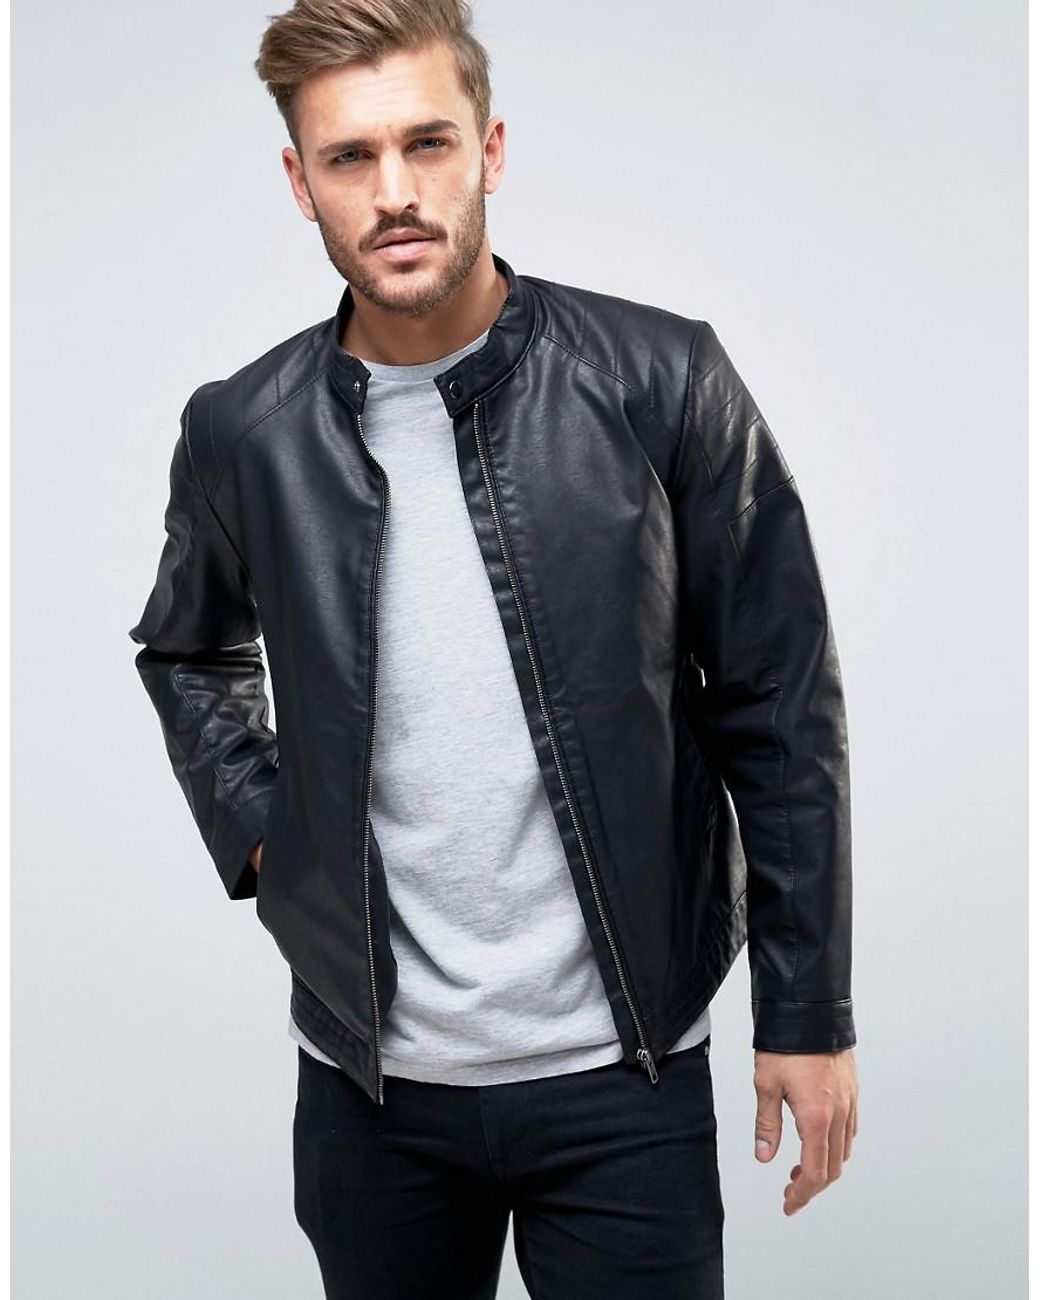 online wholesalers Artifical Leather leather motorcycle Jackets jacket ...